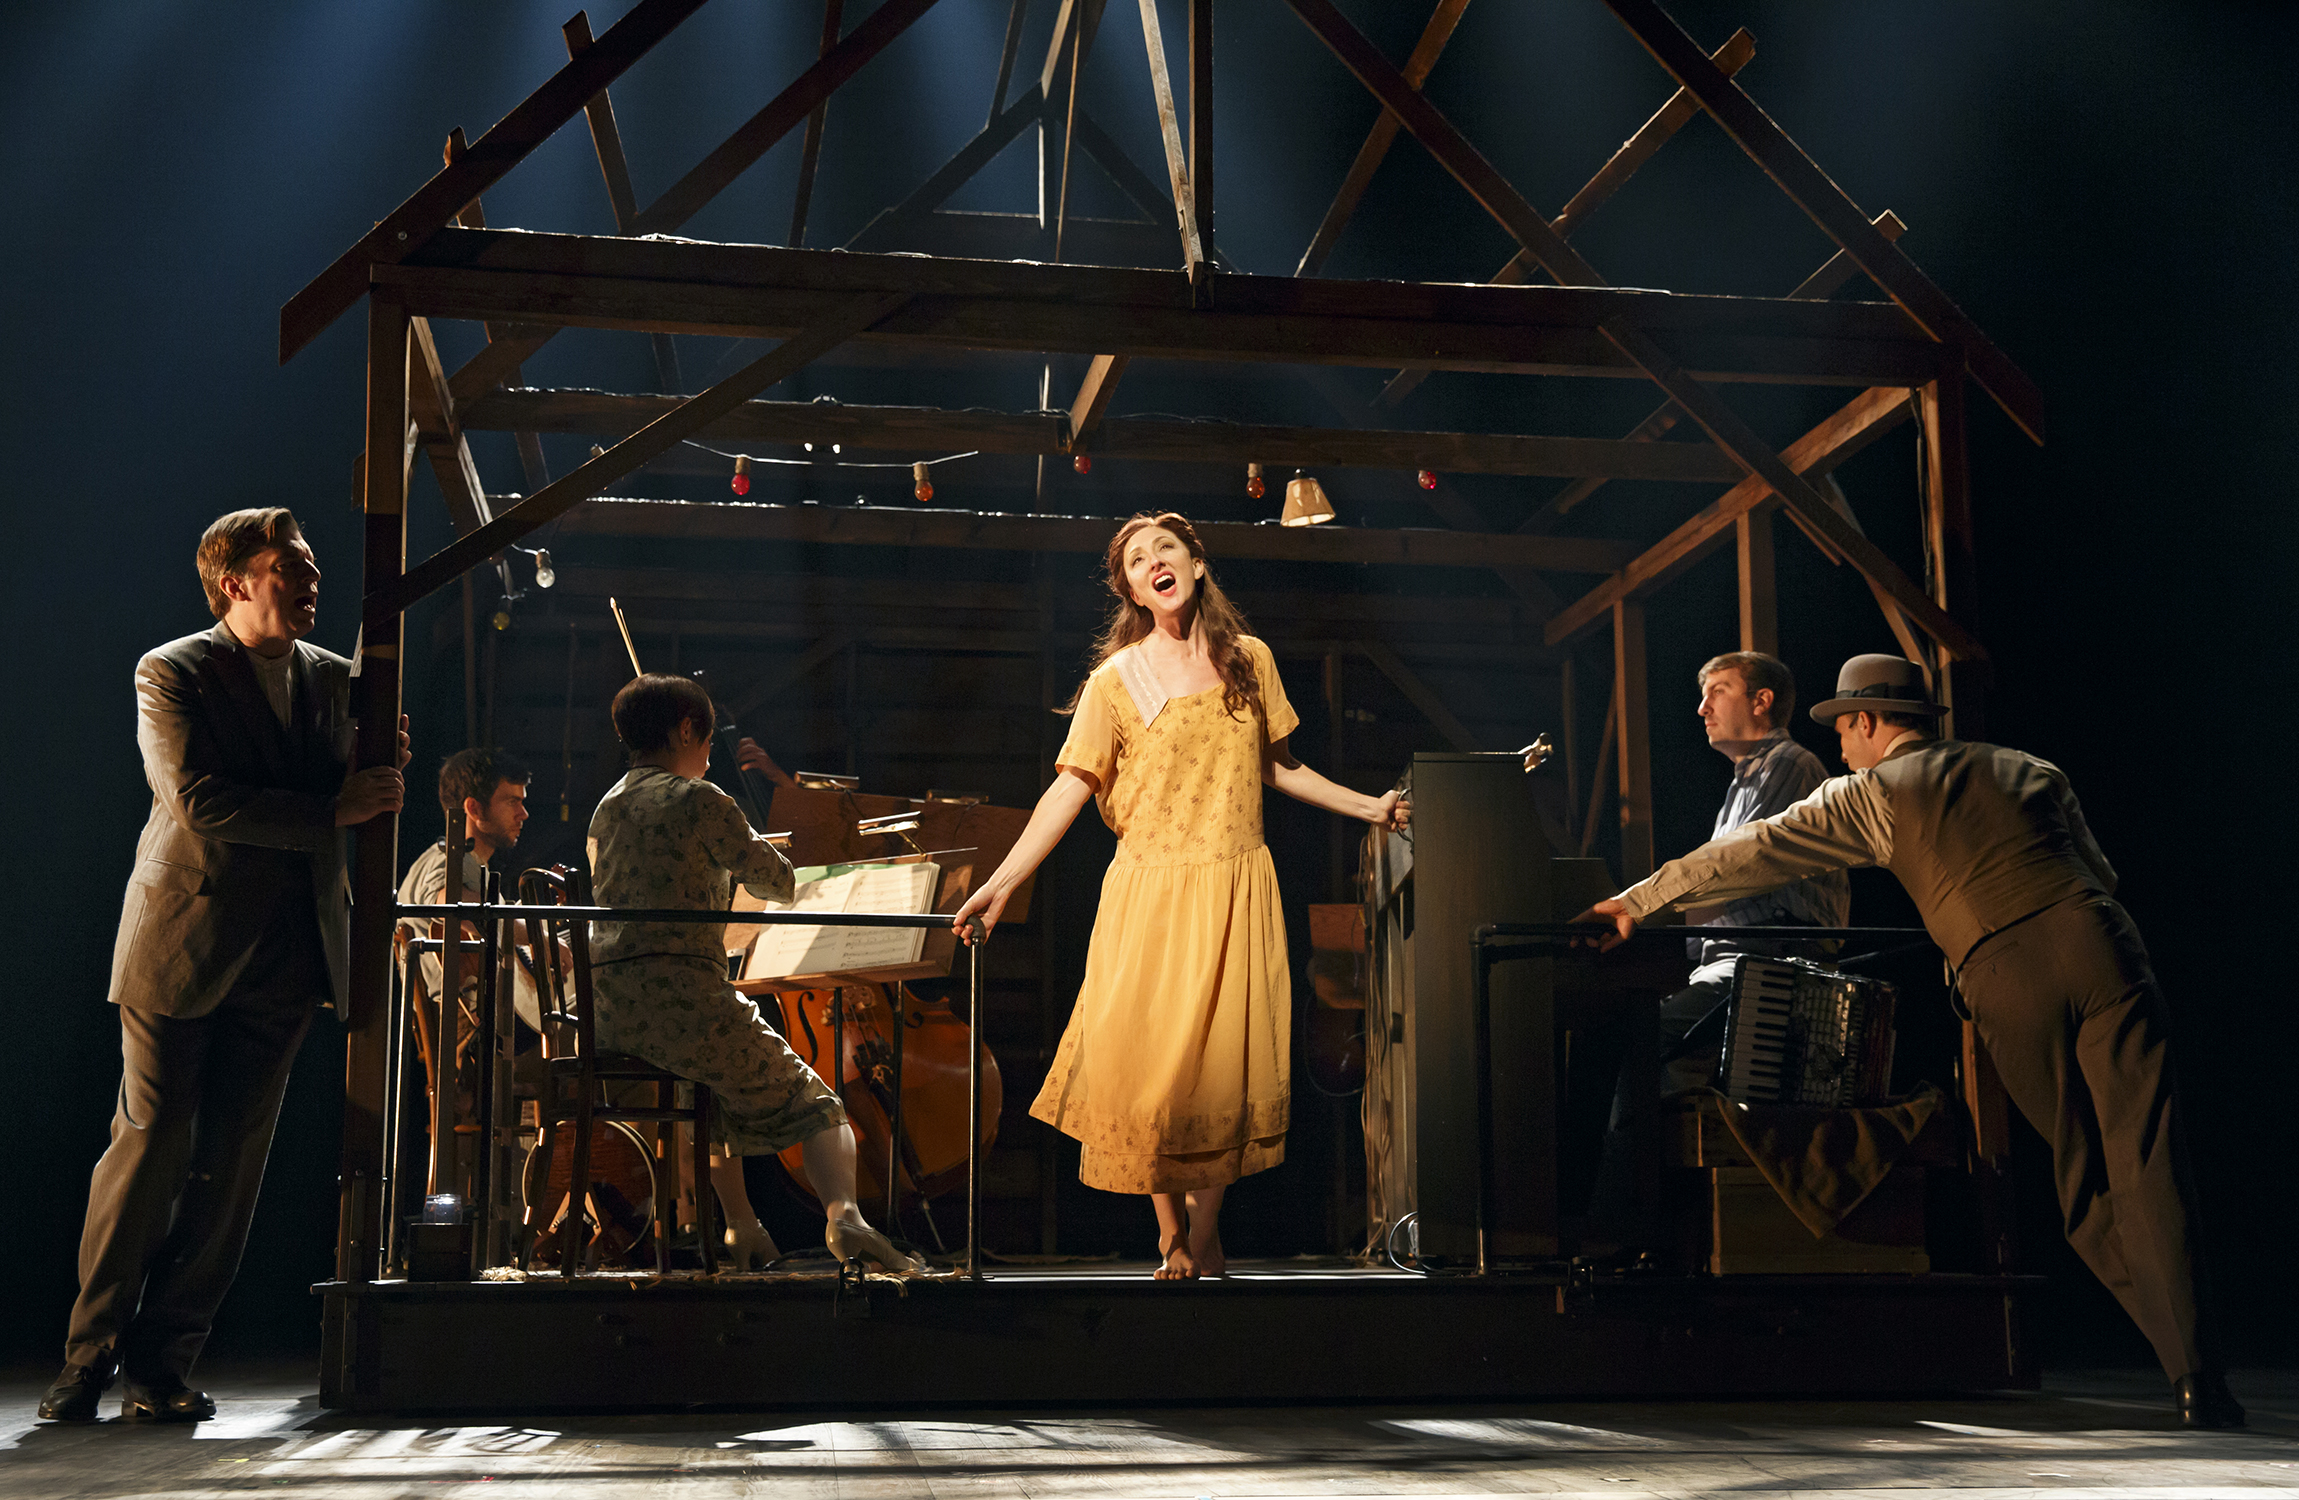 (foreground) Carmen Cusack as Alice Murphy with (from left) Scott Wakefield and Joe Jung and the orchestra of the world premiere of Bright Star, a new American musical with music by Steve Martin and Edie Brickell, lyrics by Brickell, book by Martin, based on an original story by Martin and Brickell, and directed by Tony Award winner Walter Bobbie, Sept. 14 - Nov. 2, 2014 at The Old Globe. Photo by Joan Marcus.